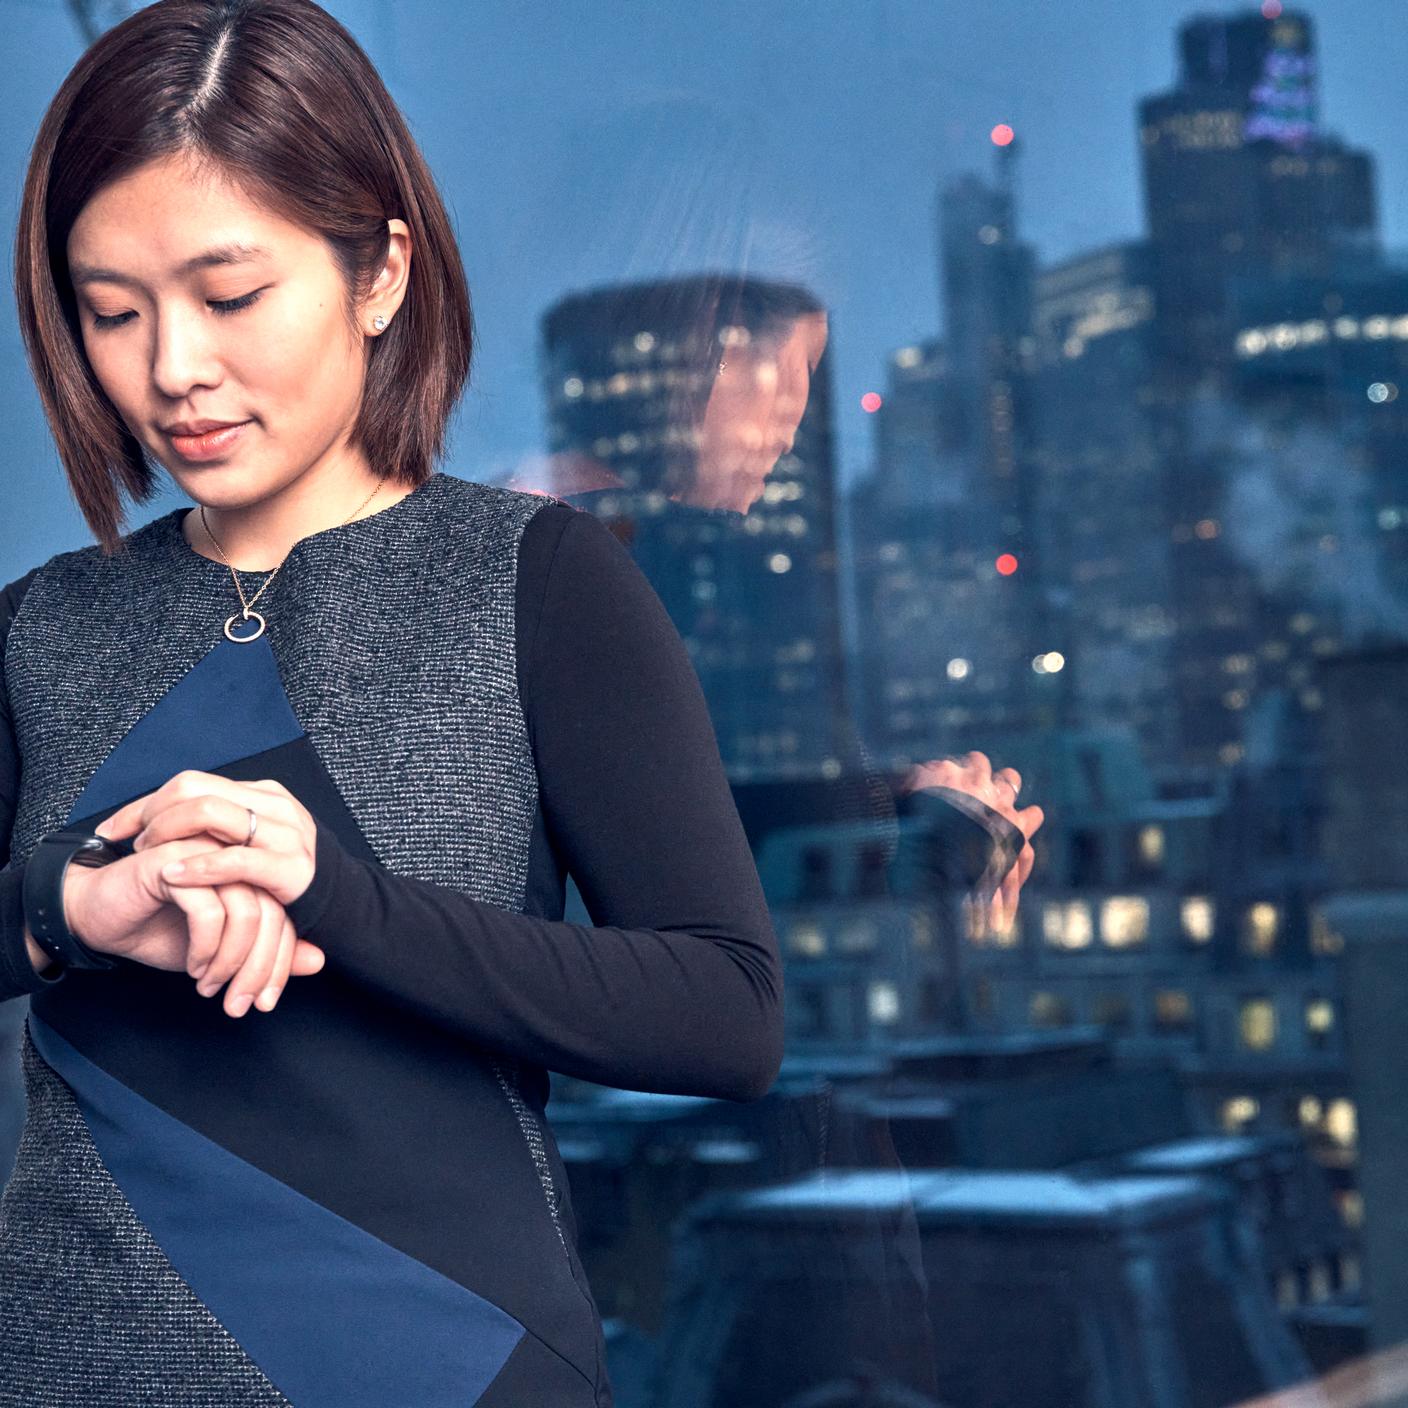 woman looking at digital watch in office in city at night